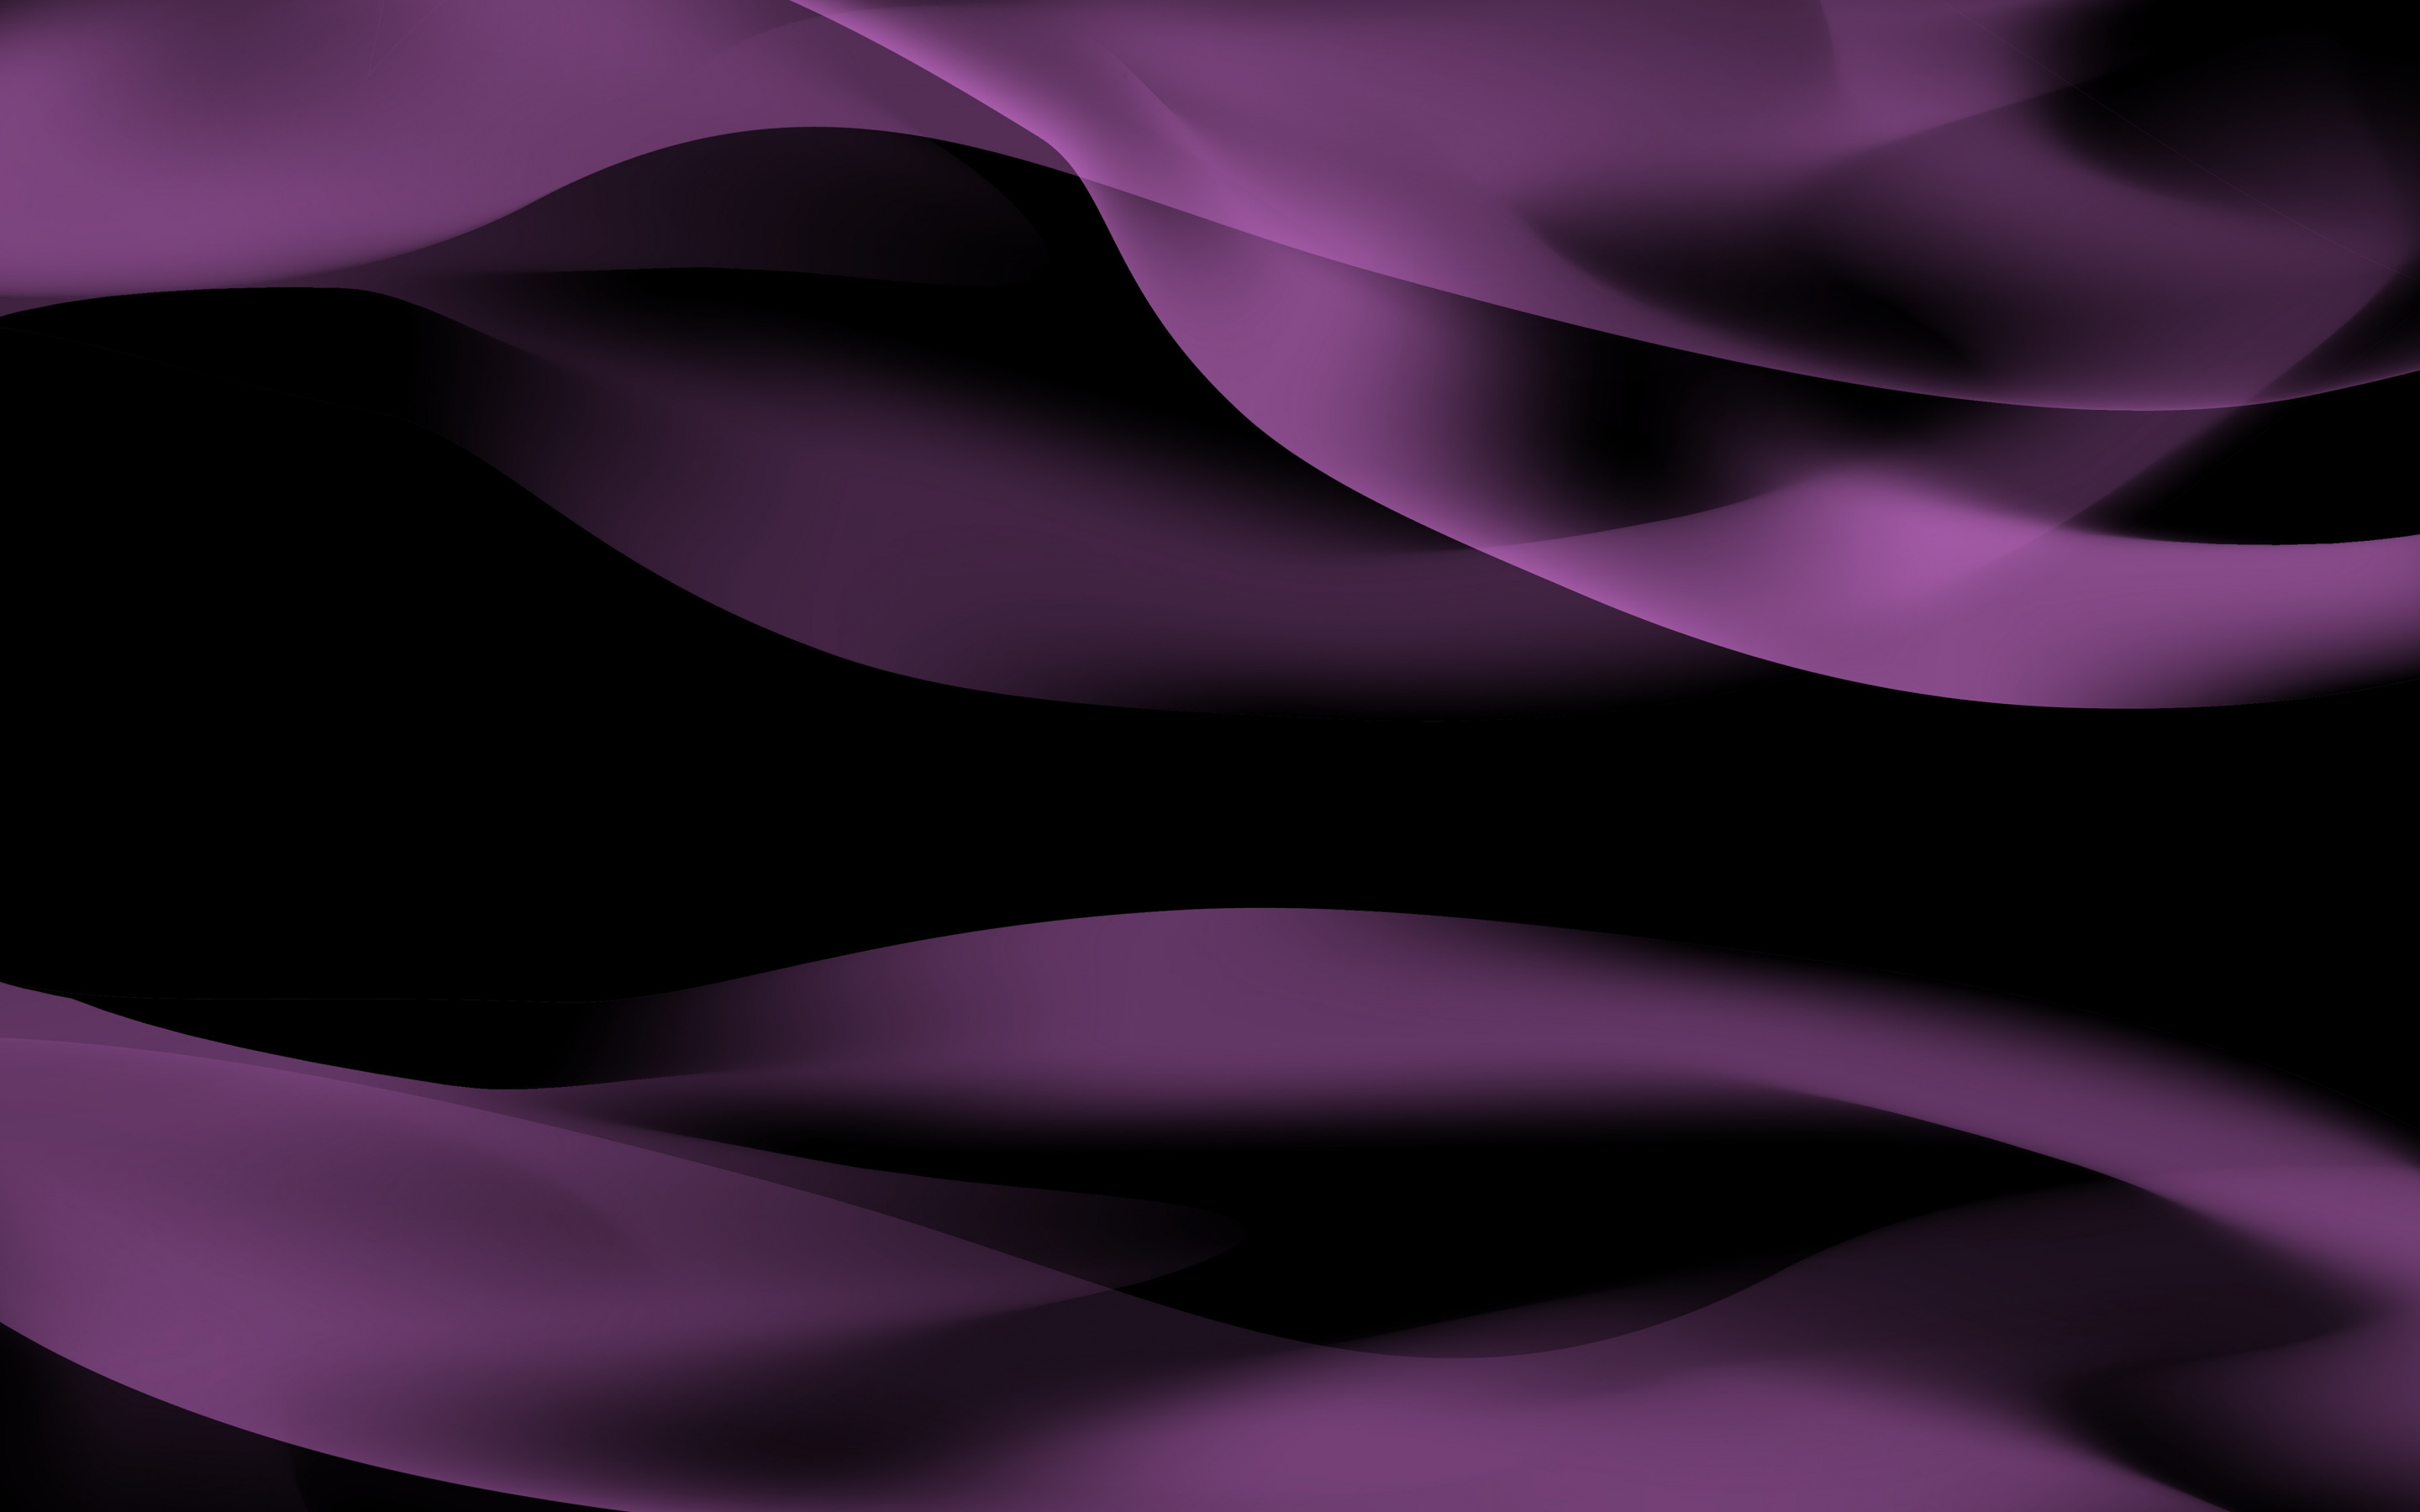 Download wallpaper purple smoke background, dark purple waves background, purple abstract waves, 3D waves background for desktop with resolution 2880x1800. High Quality HD picture wallpaper